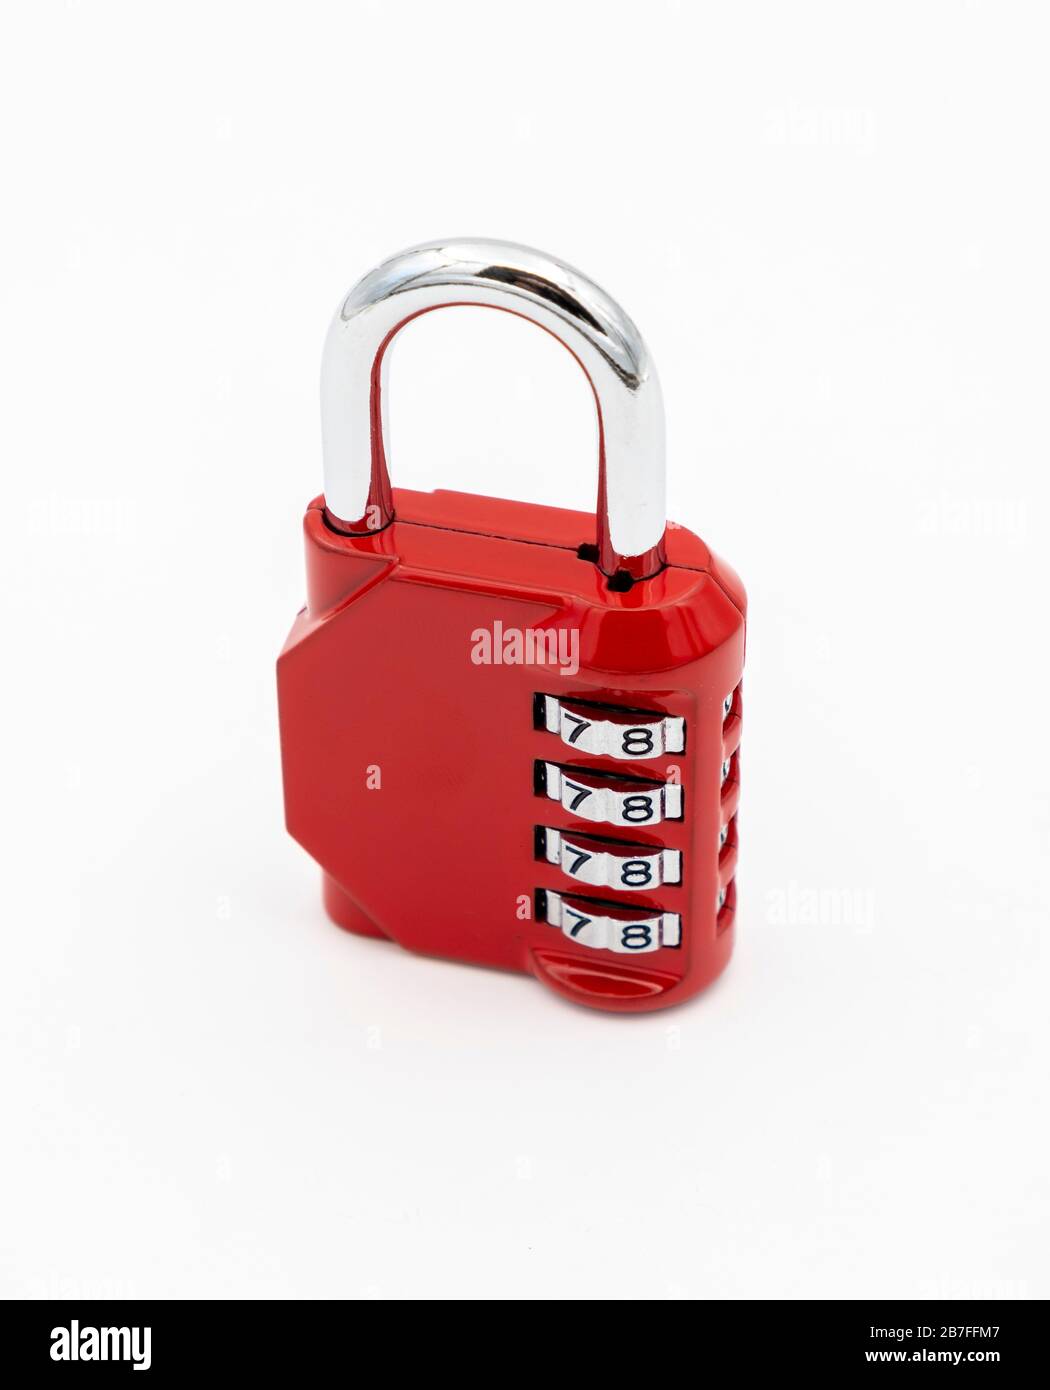 Red four digit code number padlock cut out isolated on a white background Stock Photo